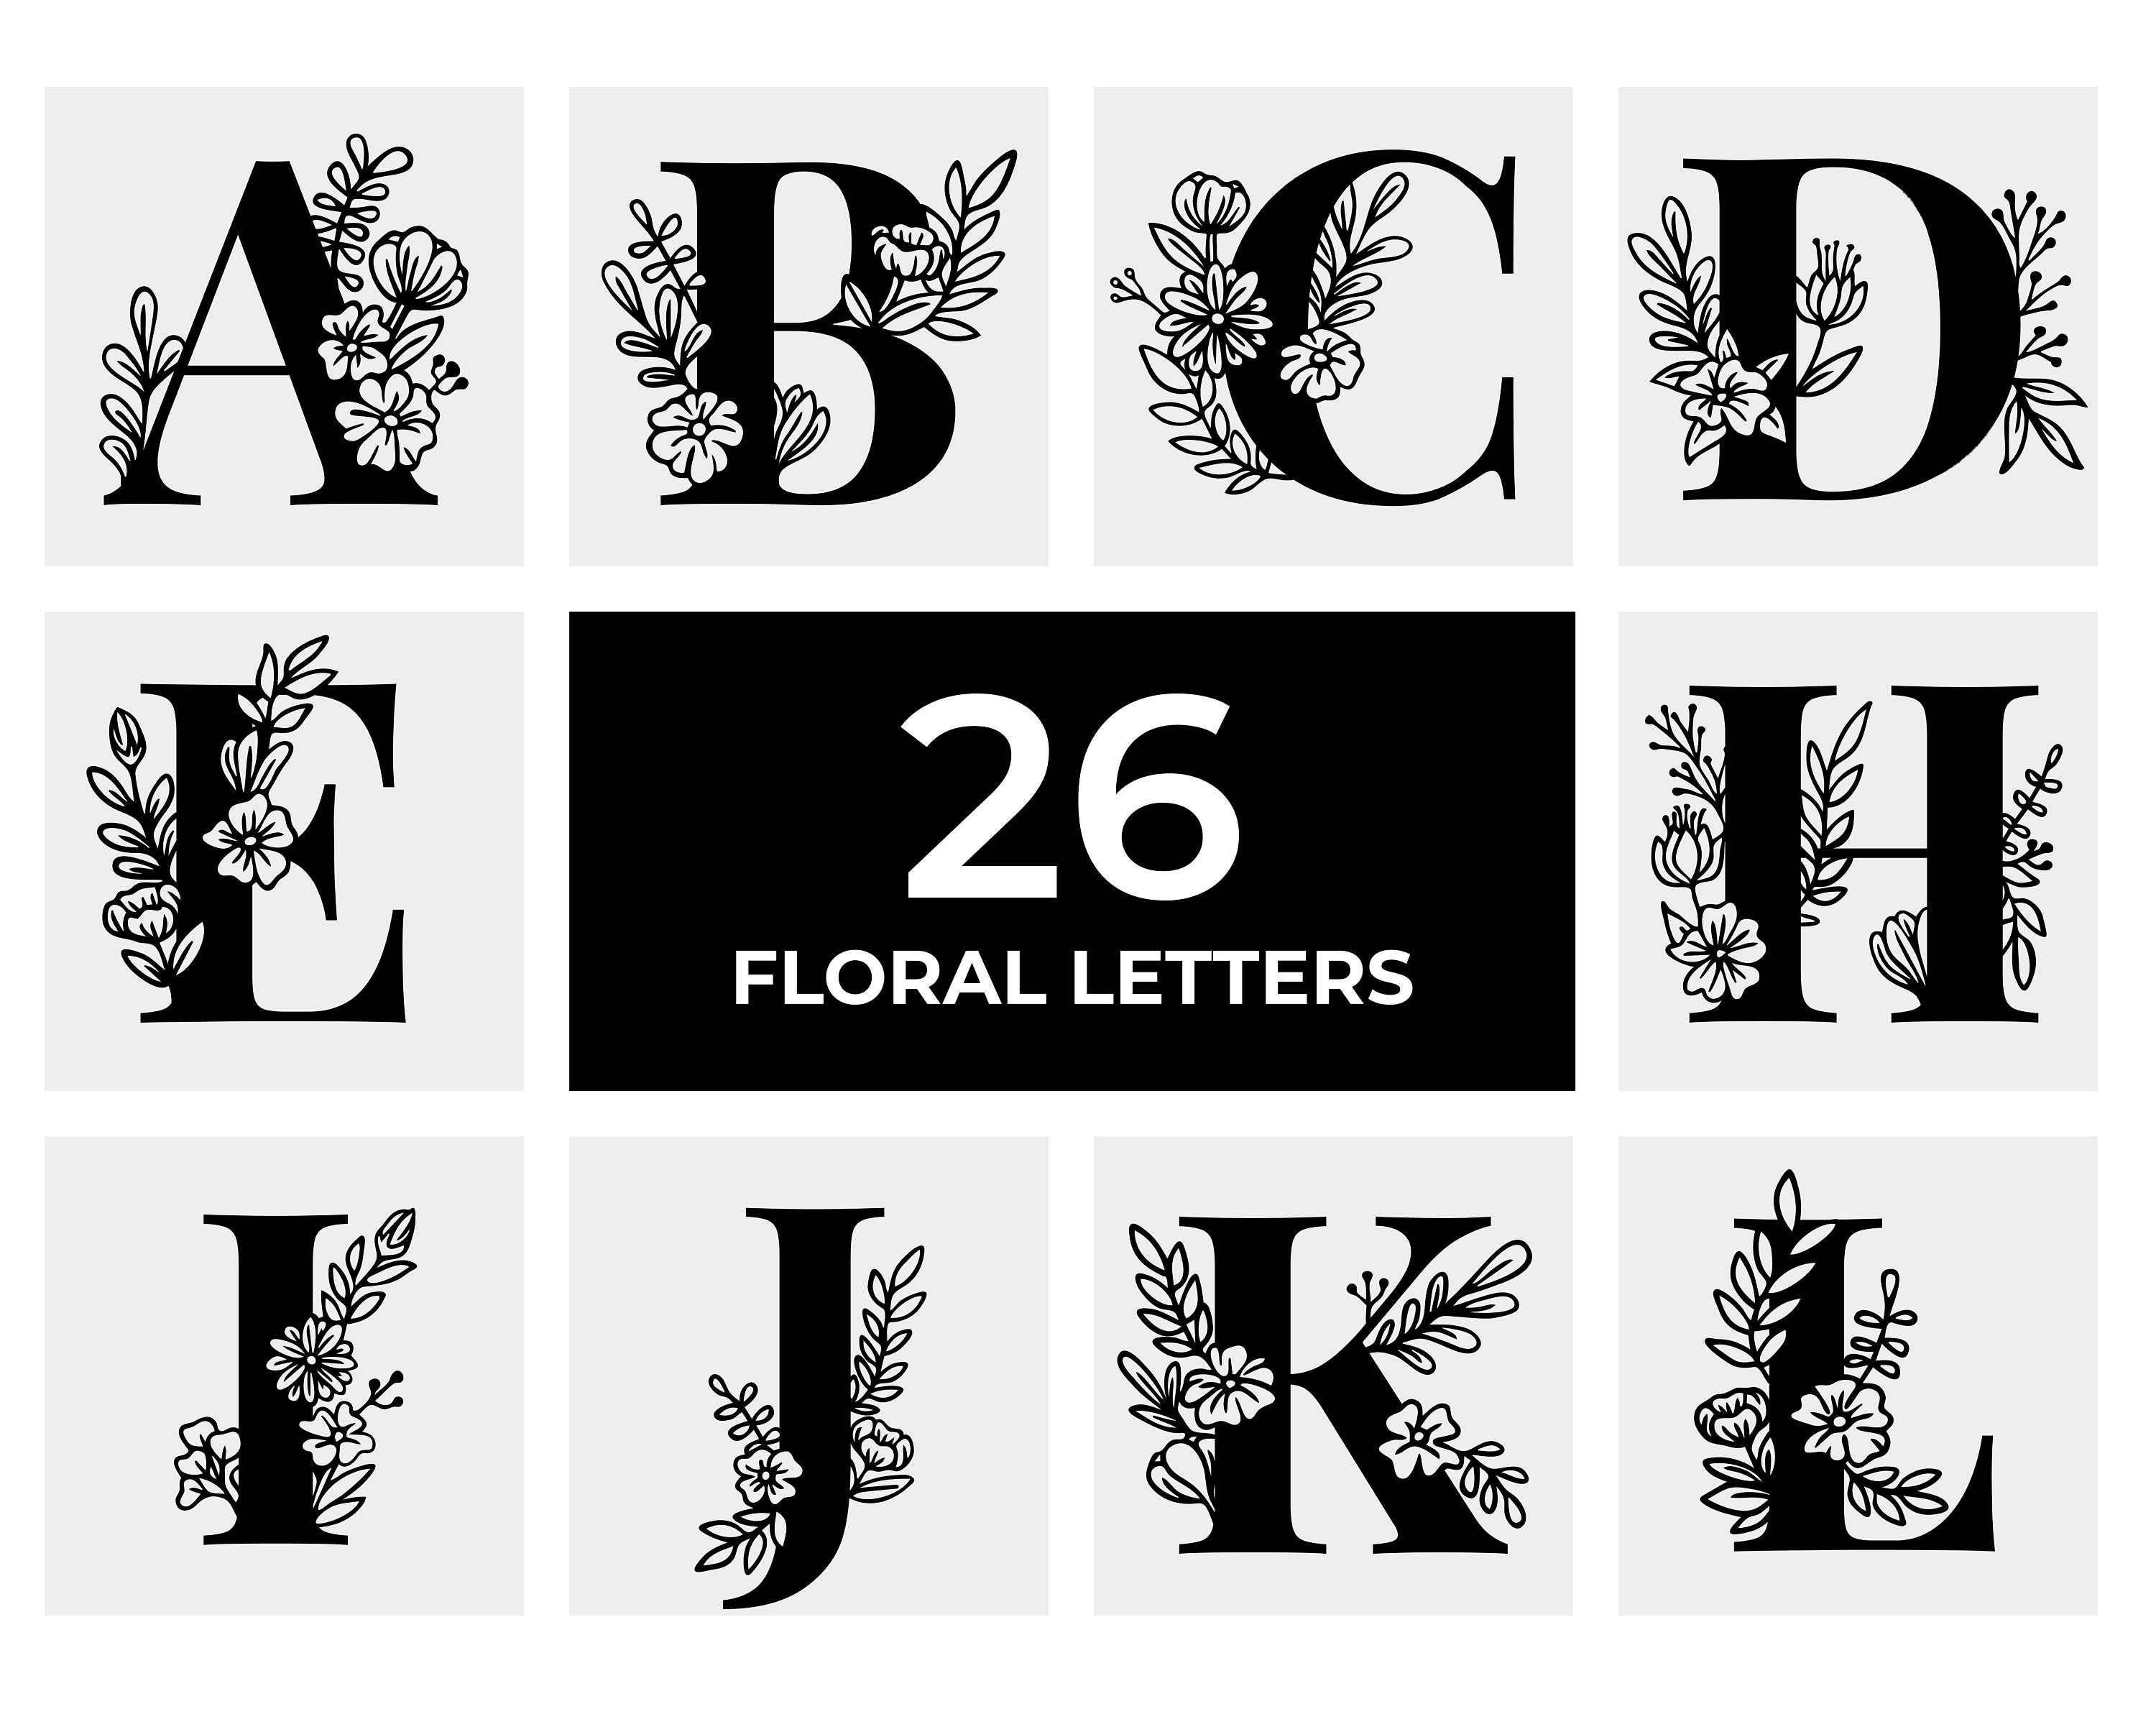 Zyadsinoudor Initial Letter H Stickers 50 Pcs Monogram Floral Wreath  Sticker Decal Single Letter Monogram Letter Round Labels Vinyl Stickers for  Water